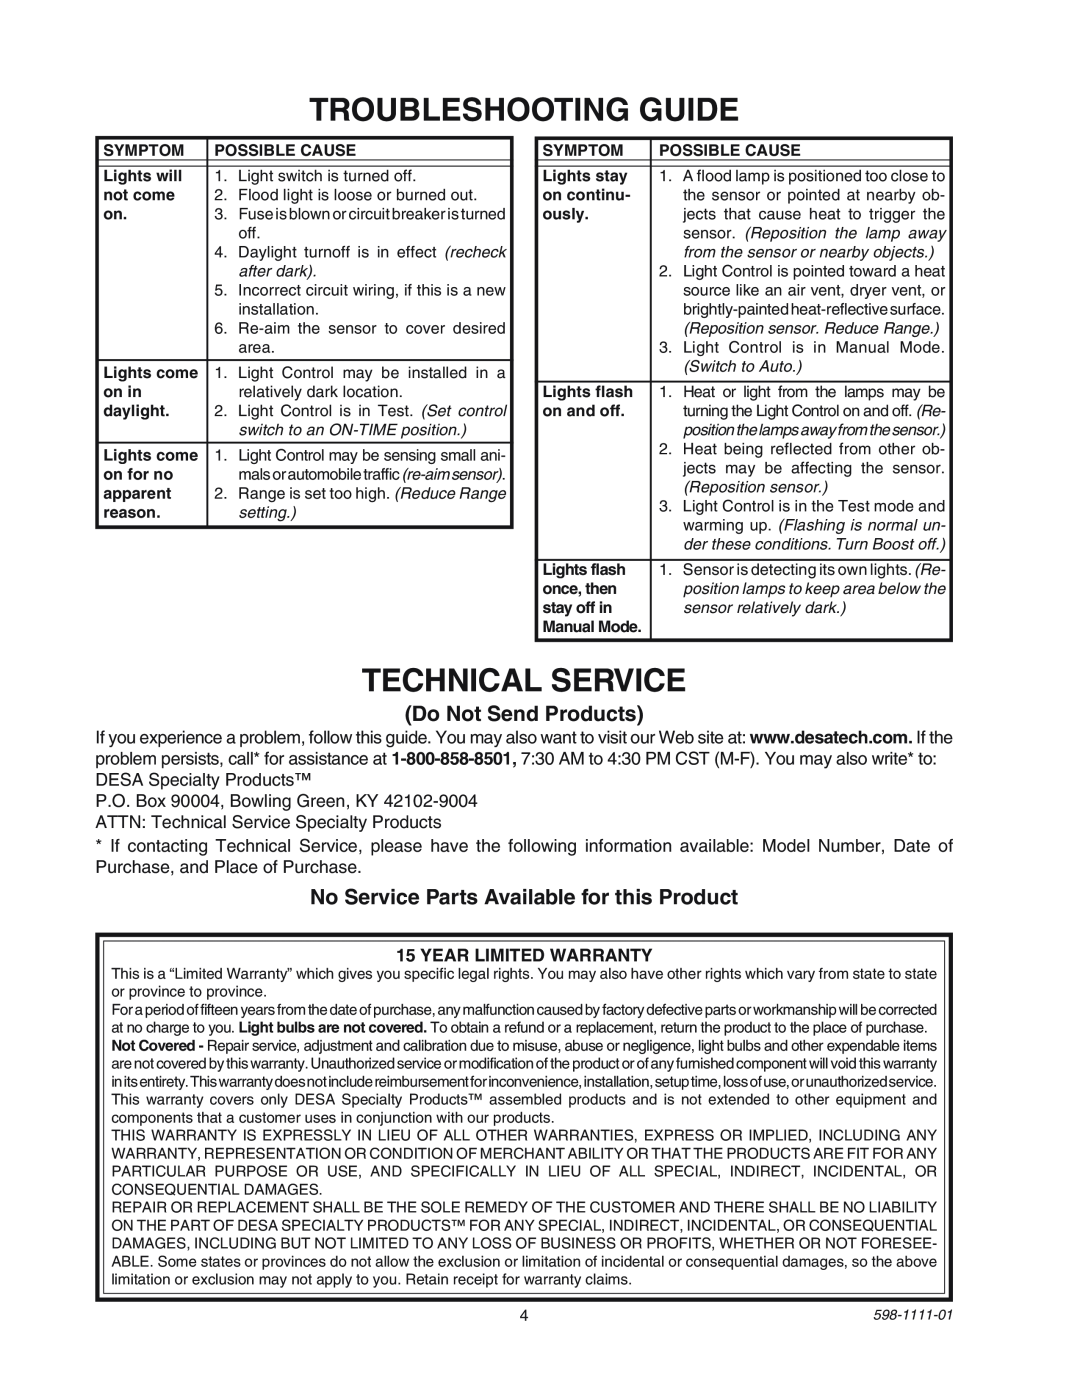 Heath Zenith CB-2011 manual Troubleshooting Guide, Technical Service, Do Not Send Products, Year Limited Warranty 